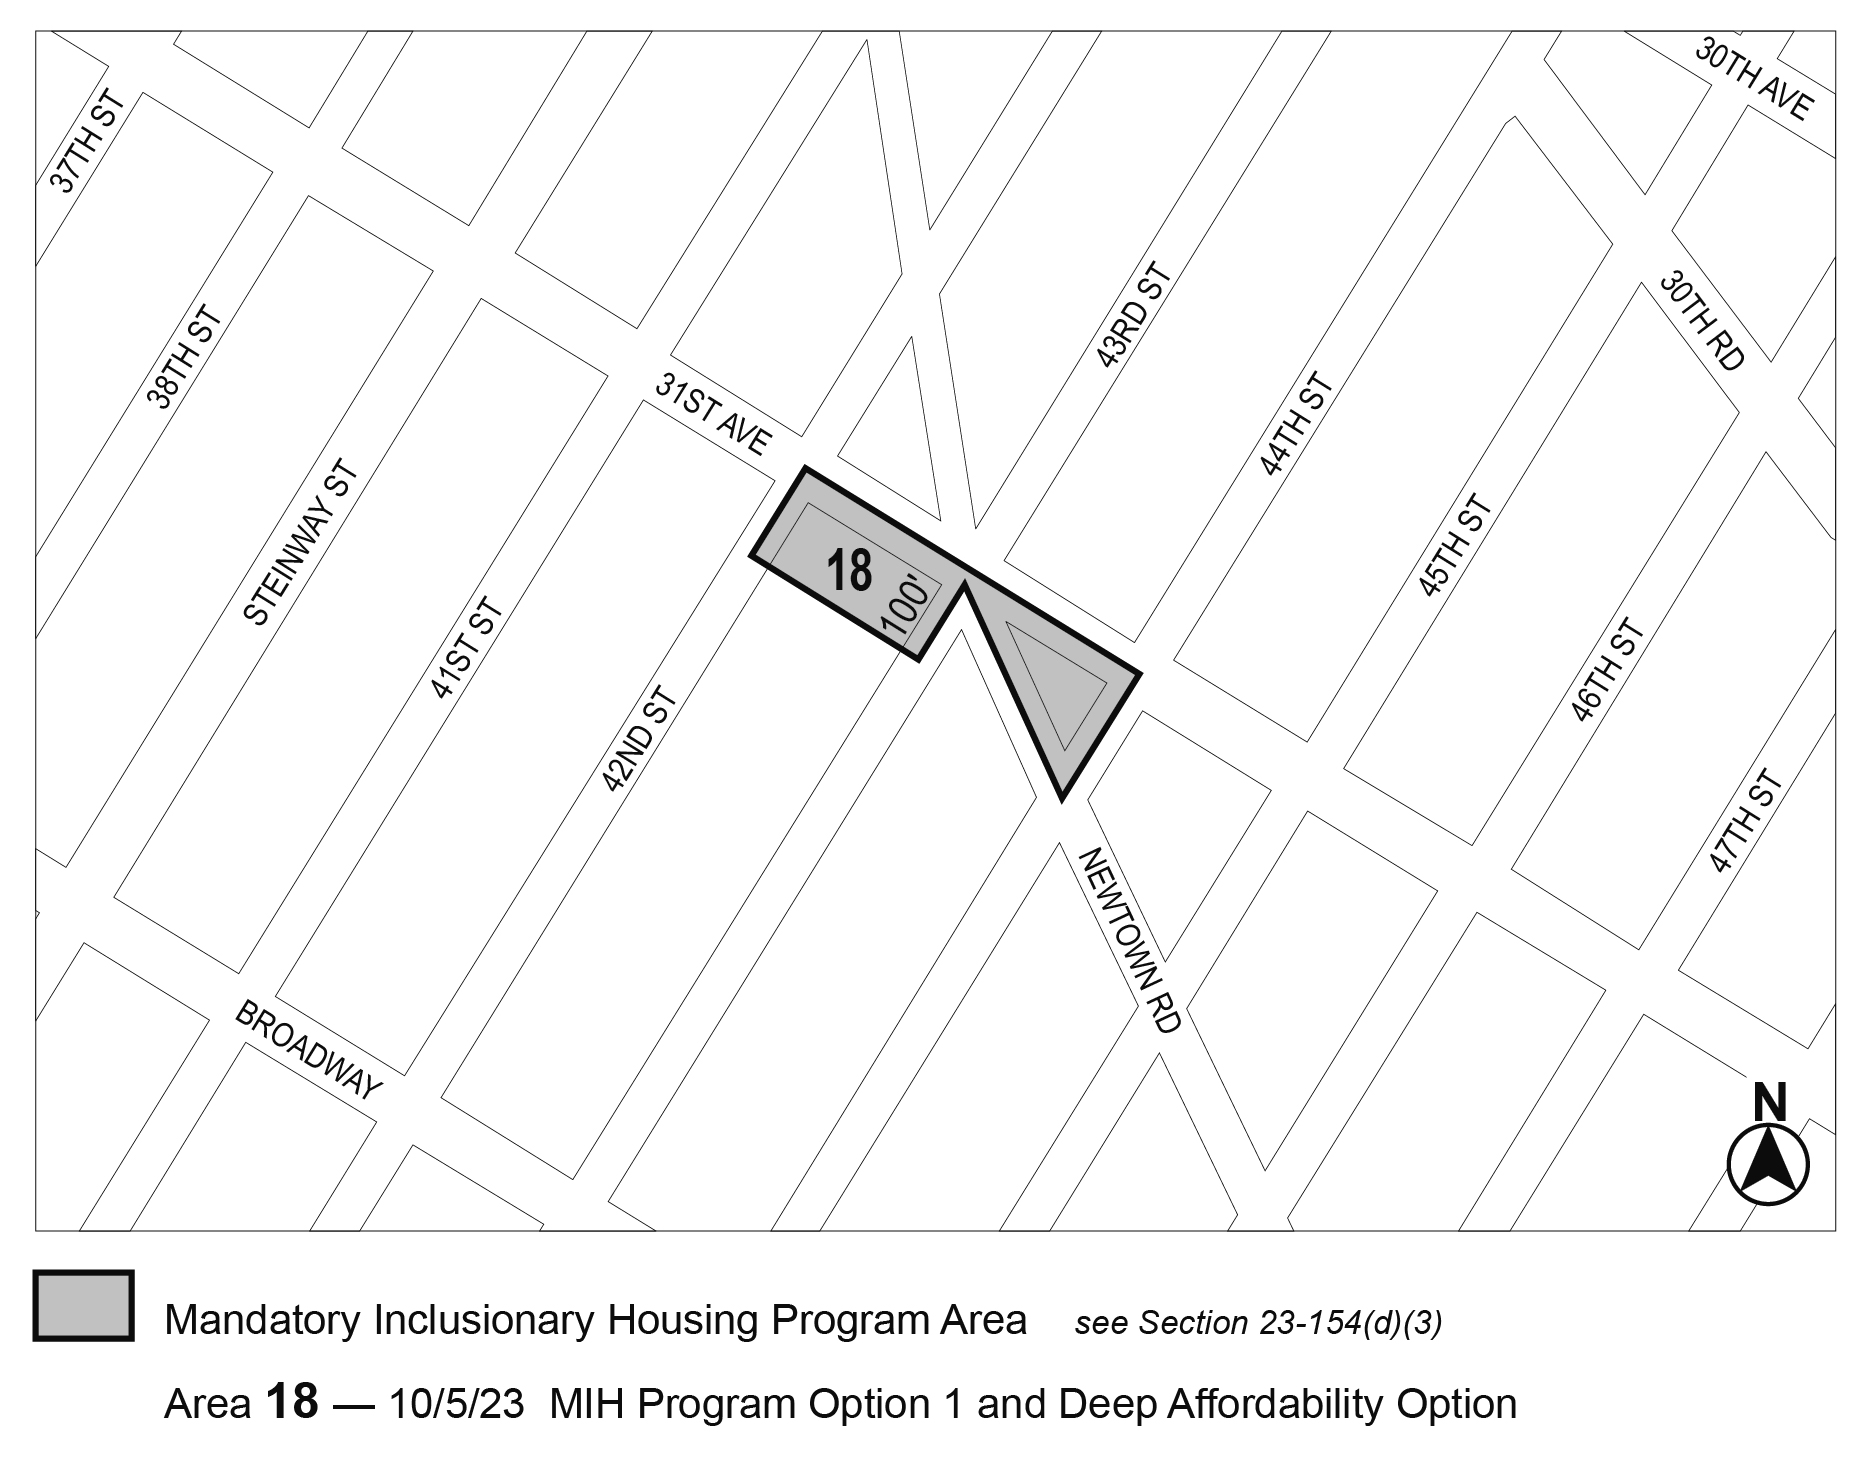 APPENDIX F, Queens CD 1, Map 11, Area 18 (Option 1, Deep Affordability Option) per <a class='sec-link-inline' target='_blank' href='/article-iv/chapter-2#42-18'><span>42-18</span></a> 31st Avenue (N 230013 ZRQ) adopted 5 October, 2023